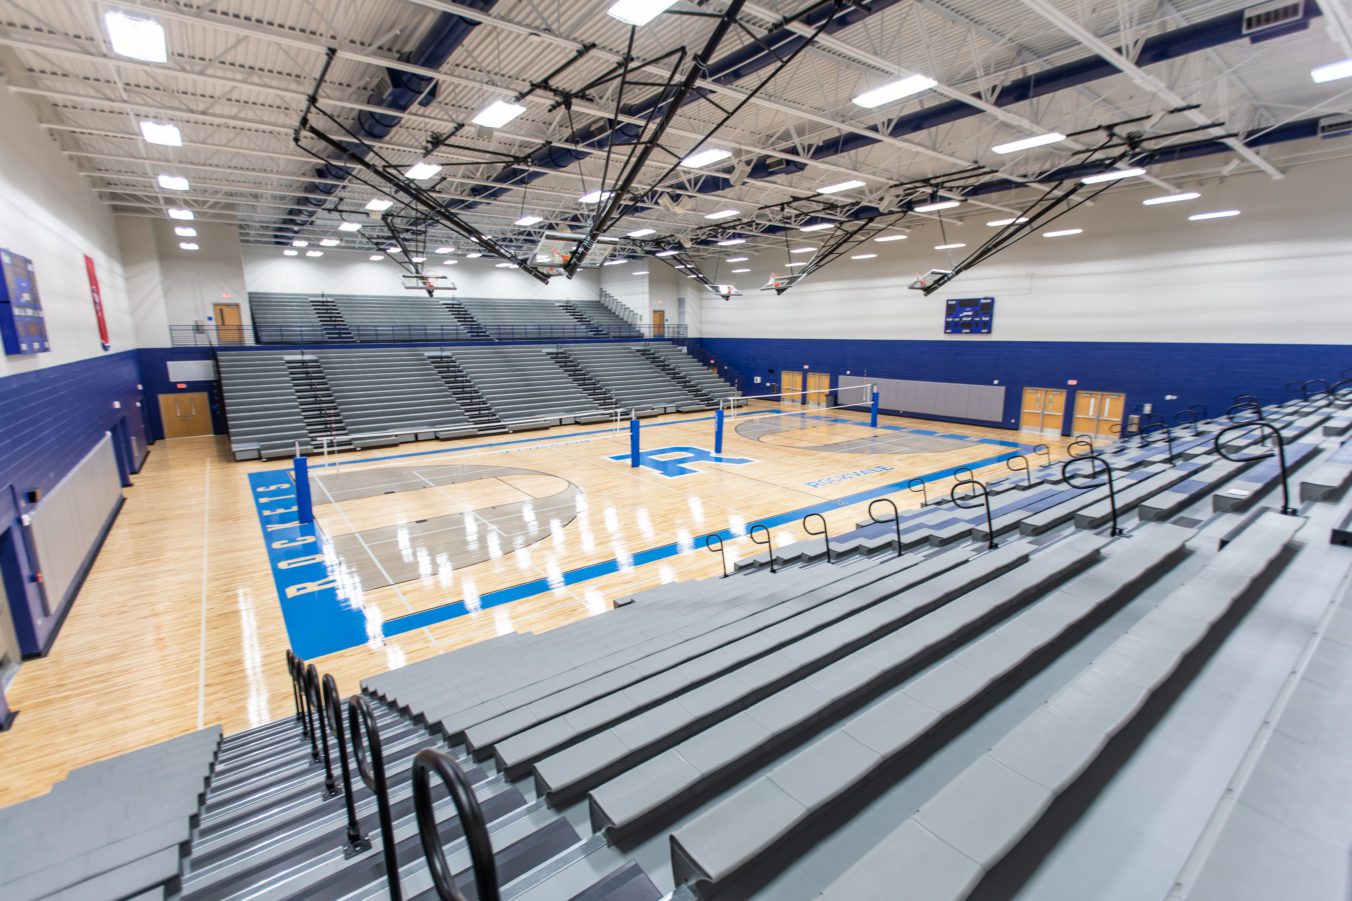 Gymnasium with basketball court and bleacher seating